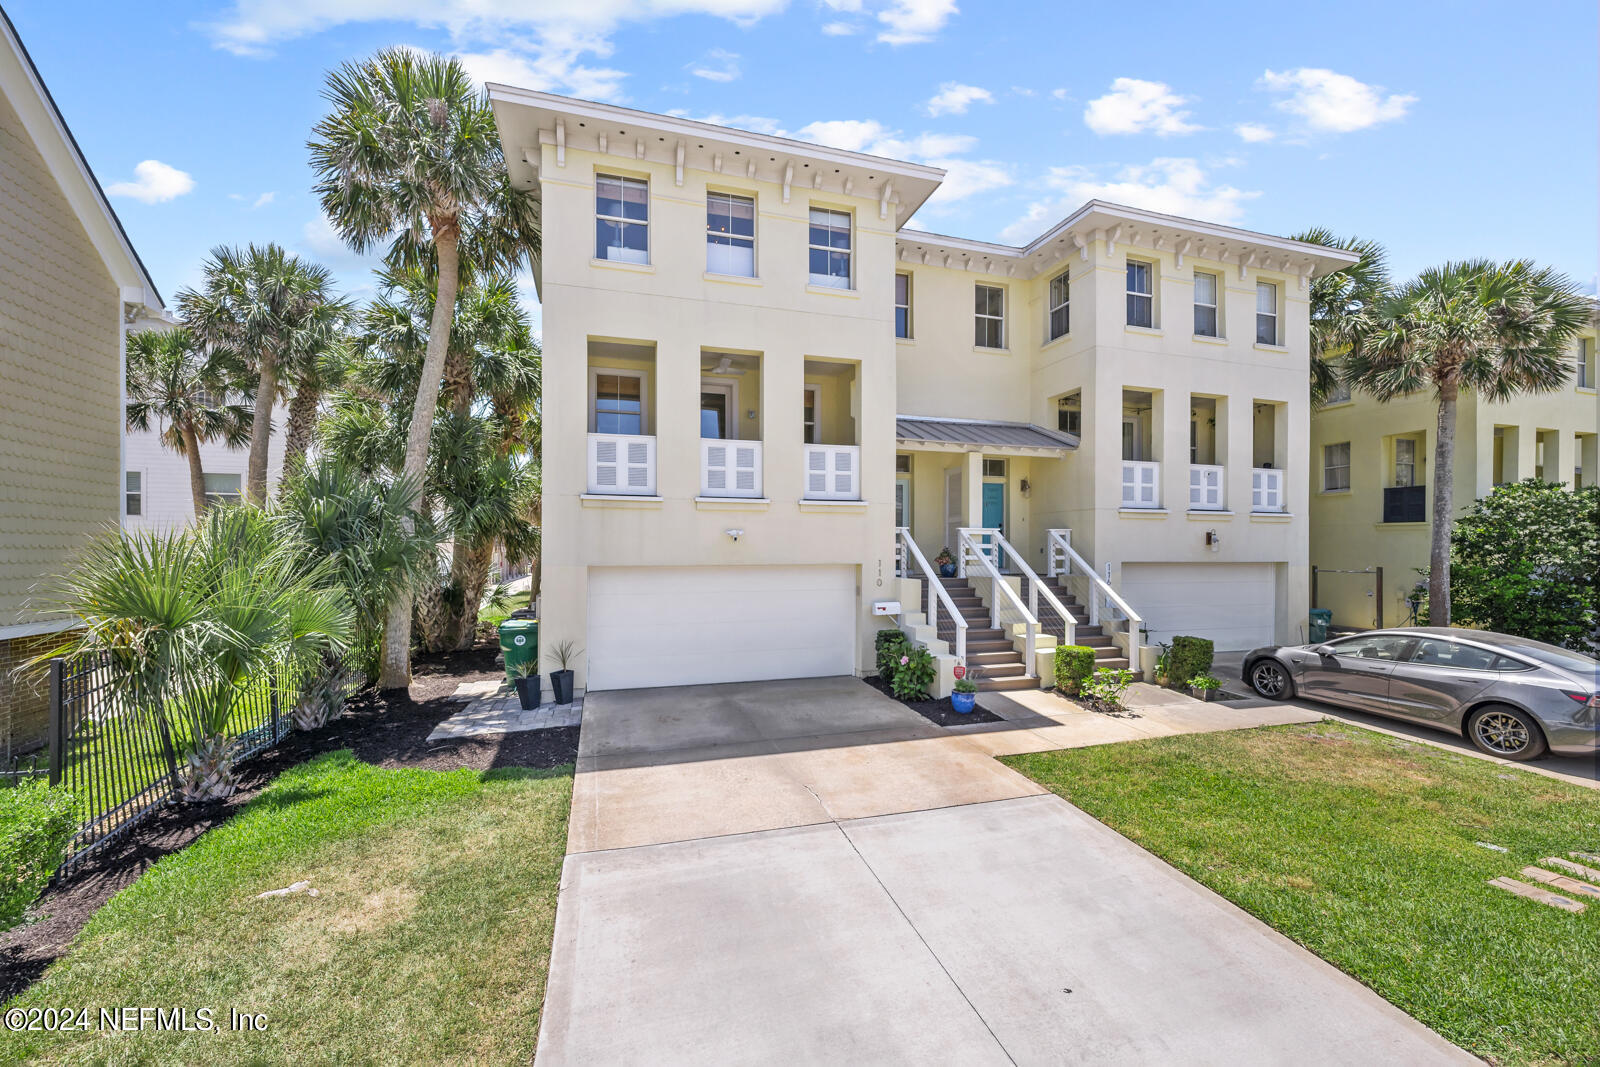 Jacksonville Beach, FL home for sale located at 110 3rd Avenue S, Jacksonville Beach, FL 32250